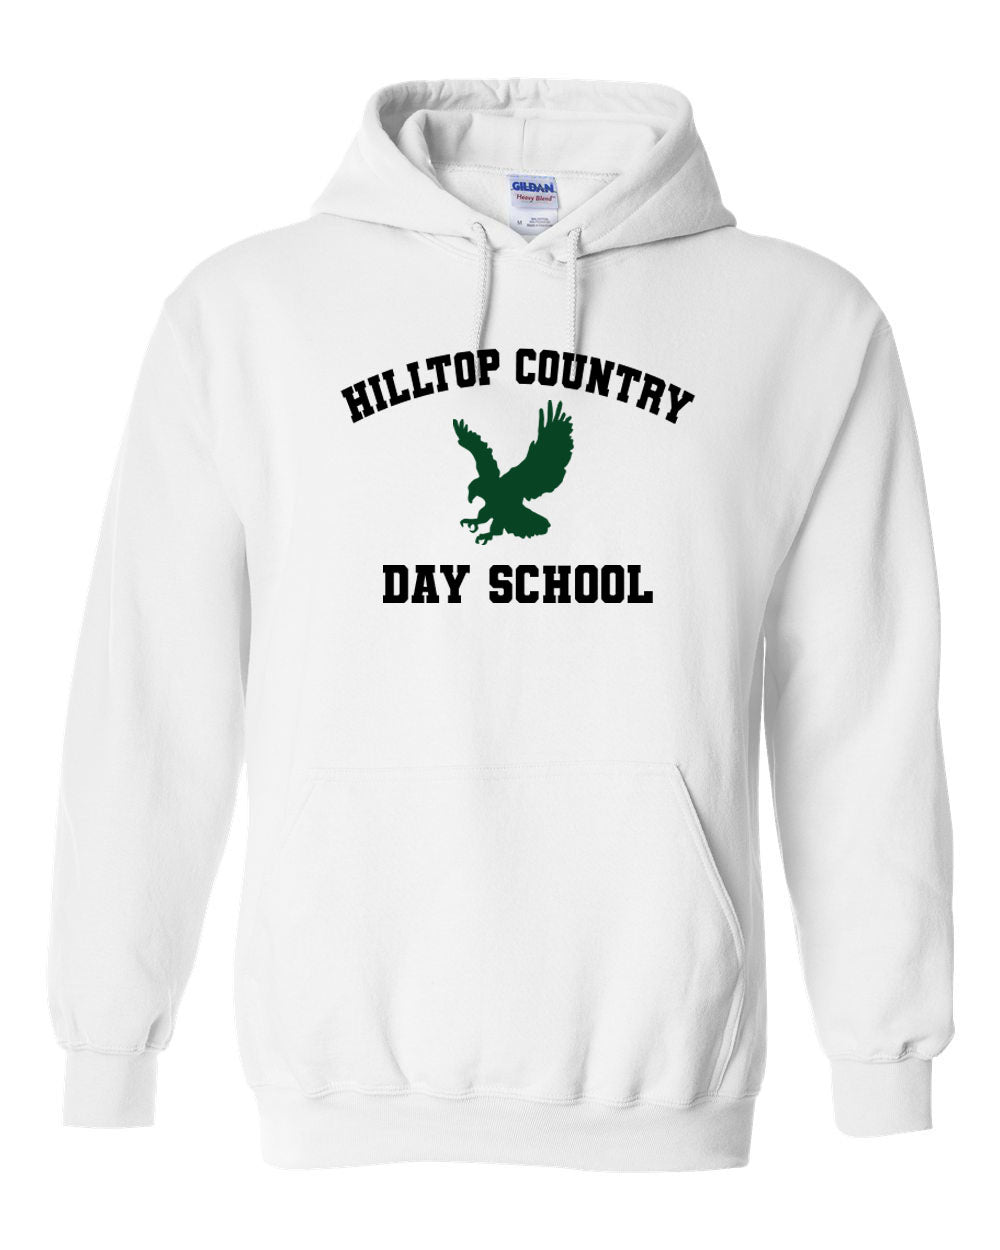 1 Hilltop Country Day School